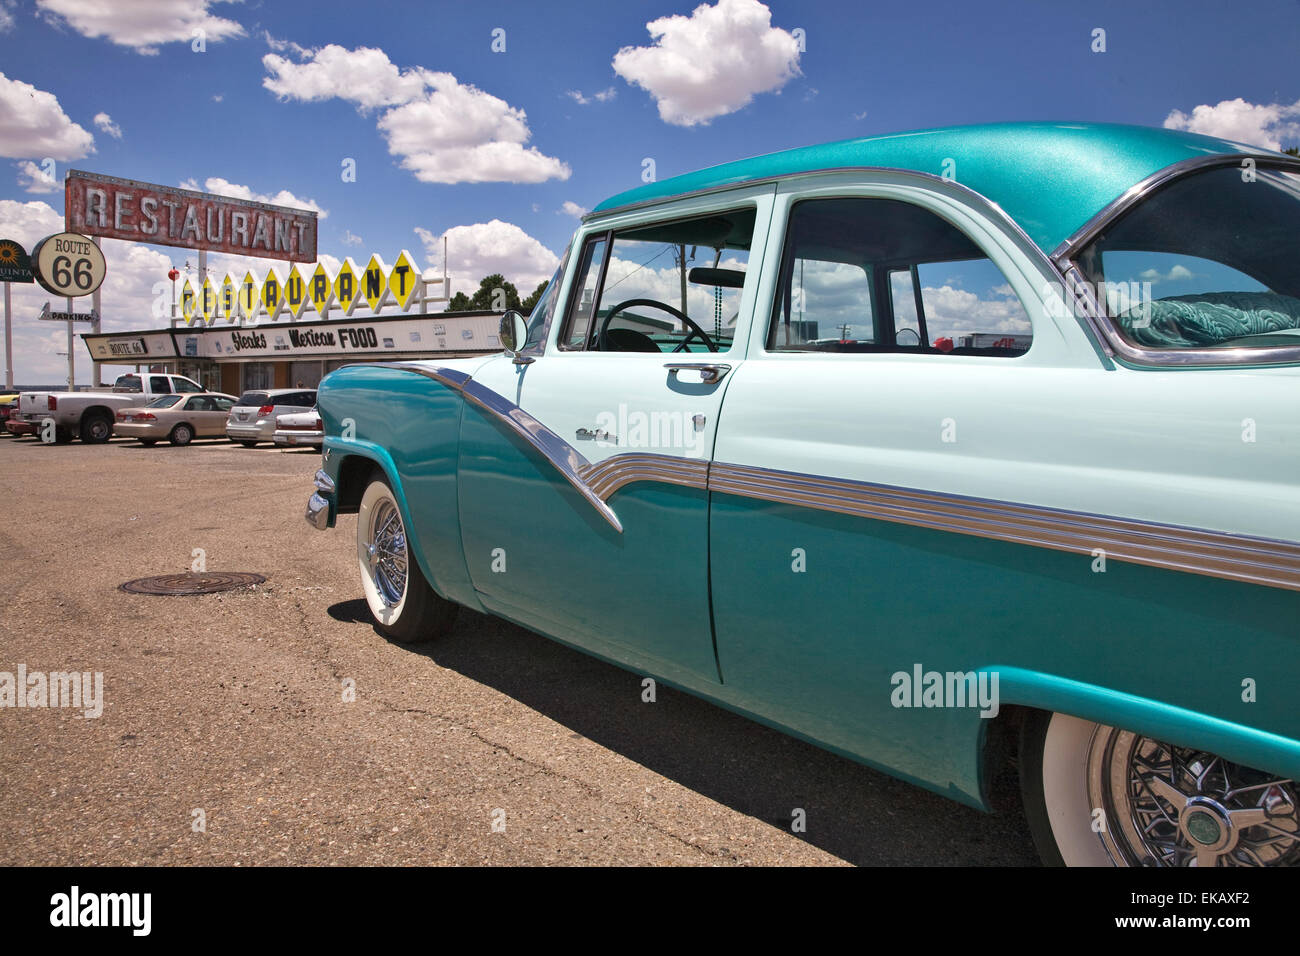 A two toned 1956 Ford Club Sedan gleams in the sun in front of a period diner on old Route 66 in Santa Rosa, New Mexico. Stock Photo